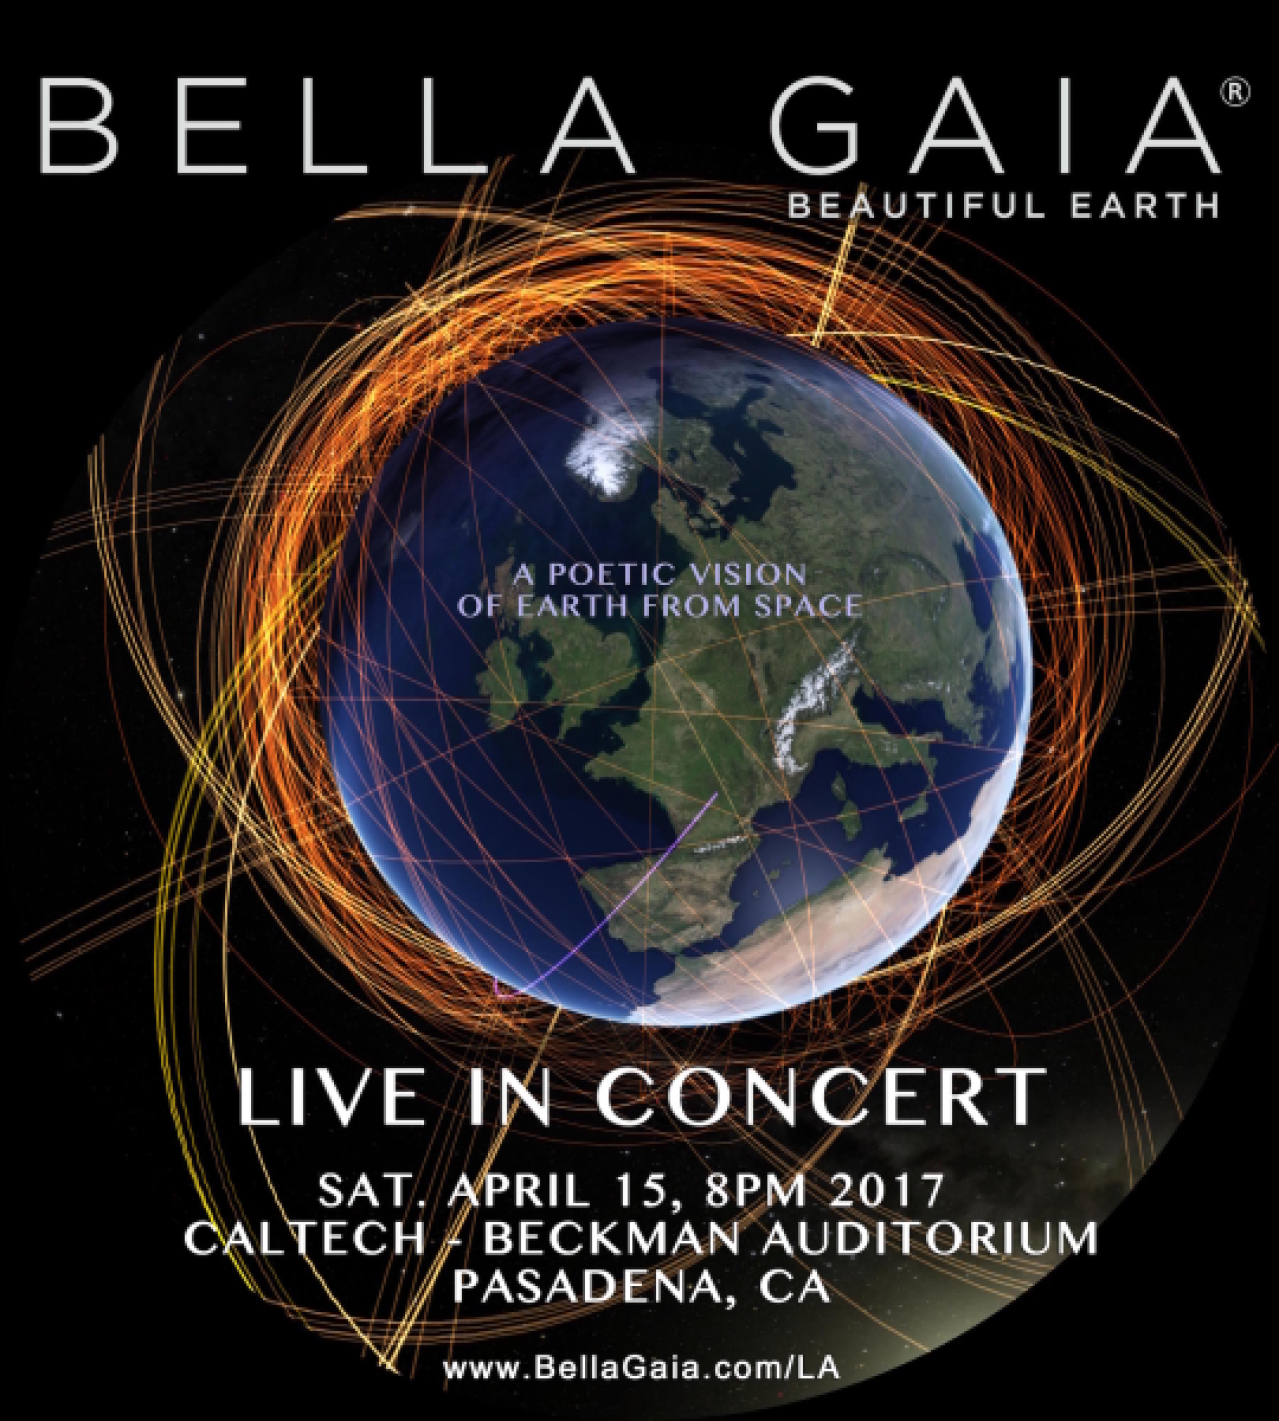 bella gaia a poetic vision of earth from space logo 66080